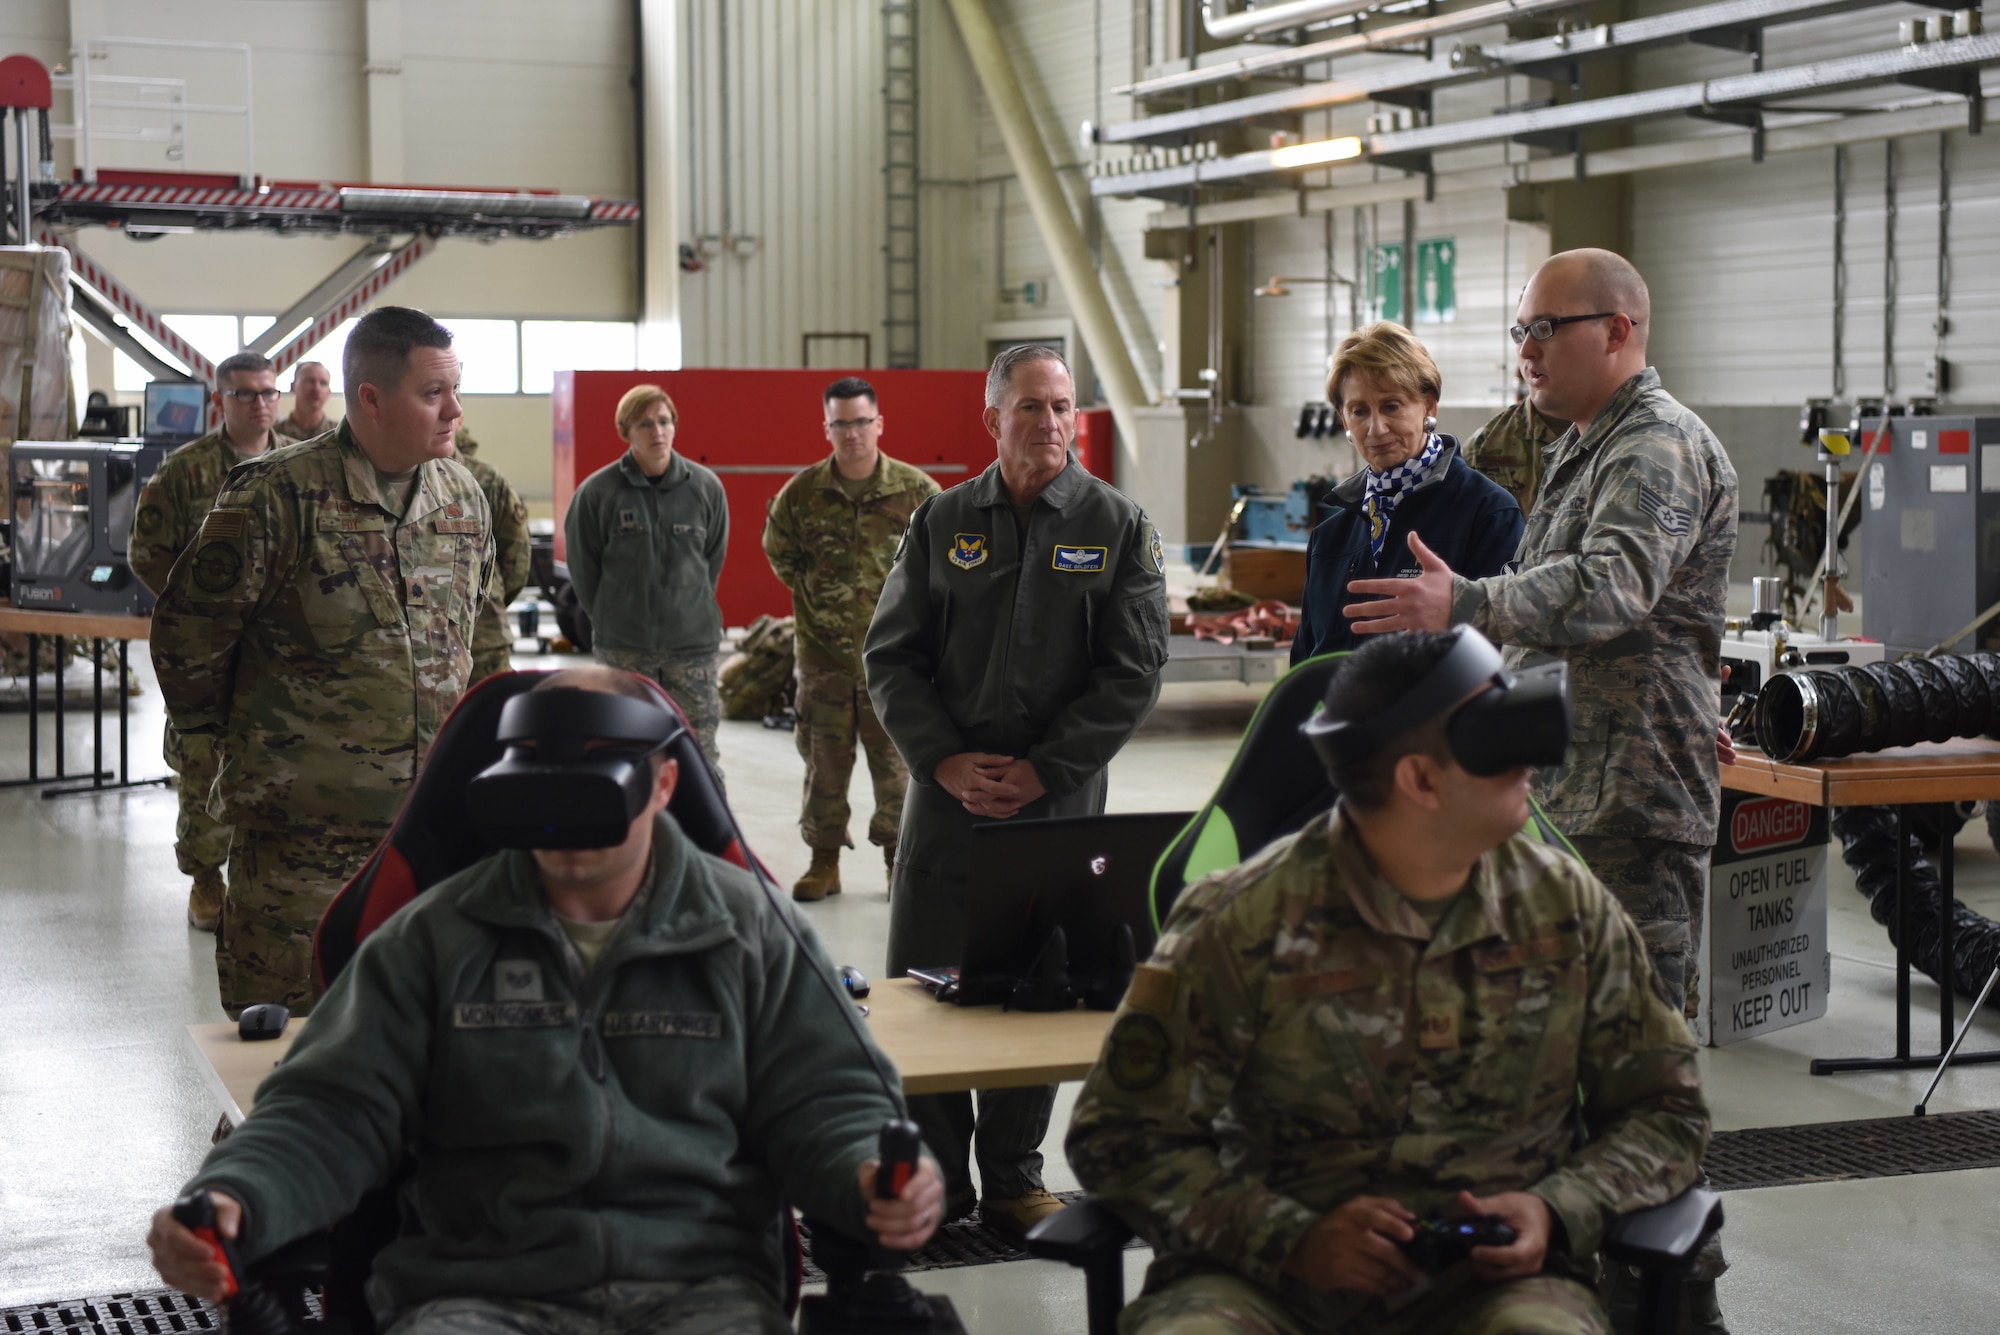 Members of 721st Maintenance Squadron discuss new training tactics with Air Force Chief of Staff Gen. David L. Goldfein and Secretary of the Air Force Barbara Barrett during a tour on Ramstein Air Base, Germany, Nov. 22, 2019.